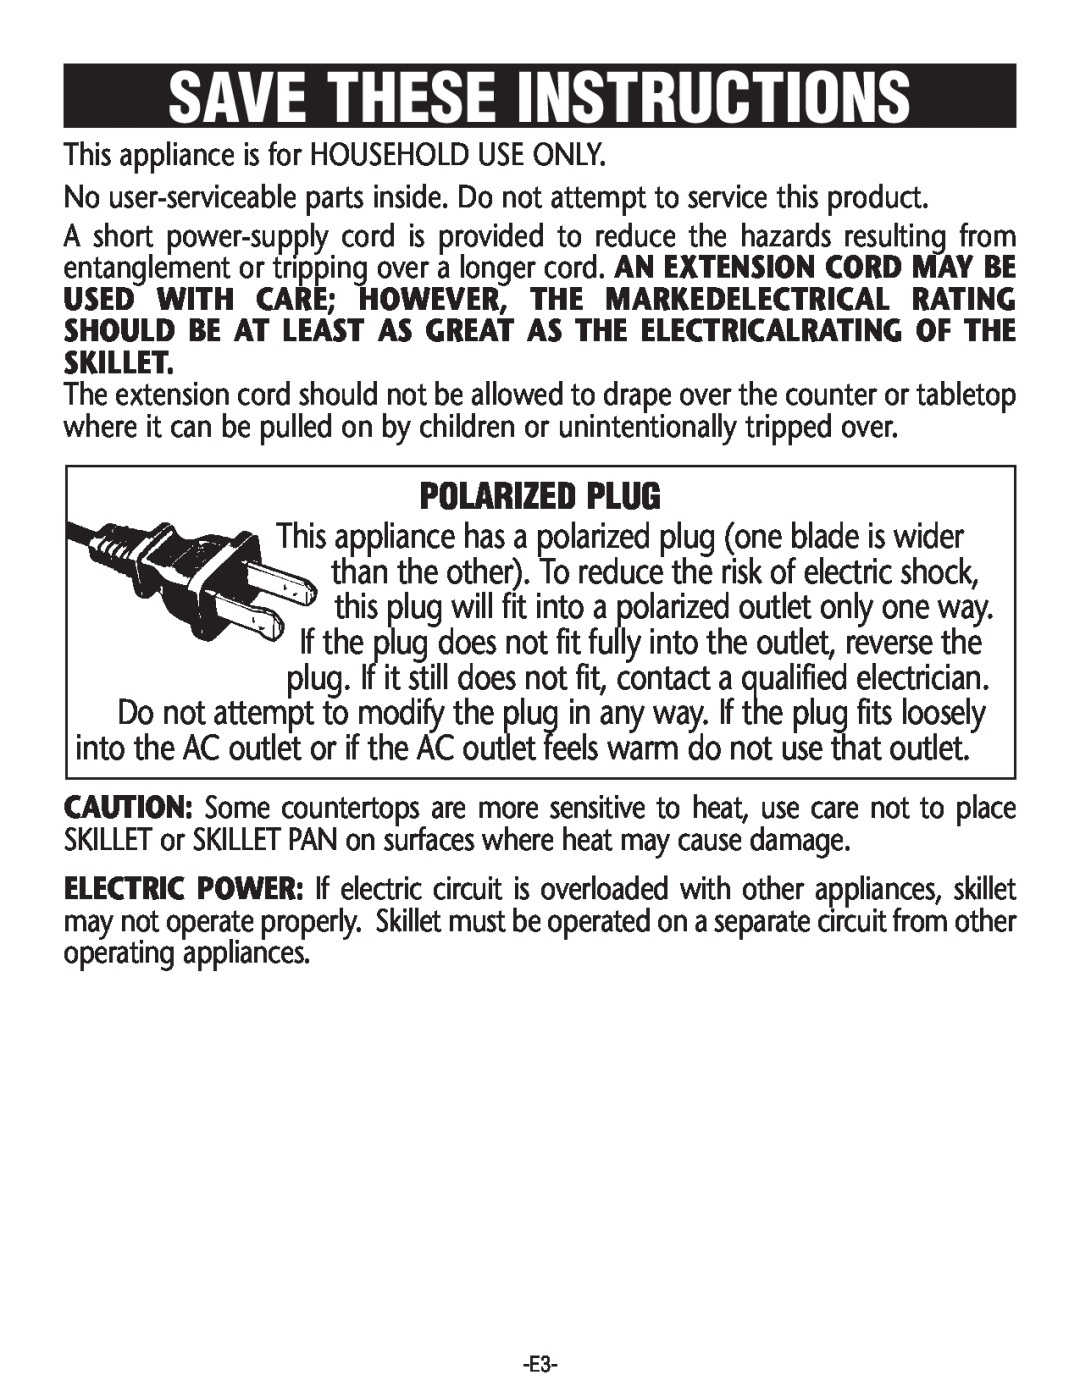 Rival S16SG-CN manual Save These Instructions, Polarized Plug 